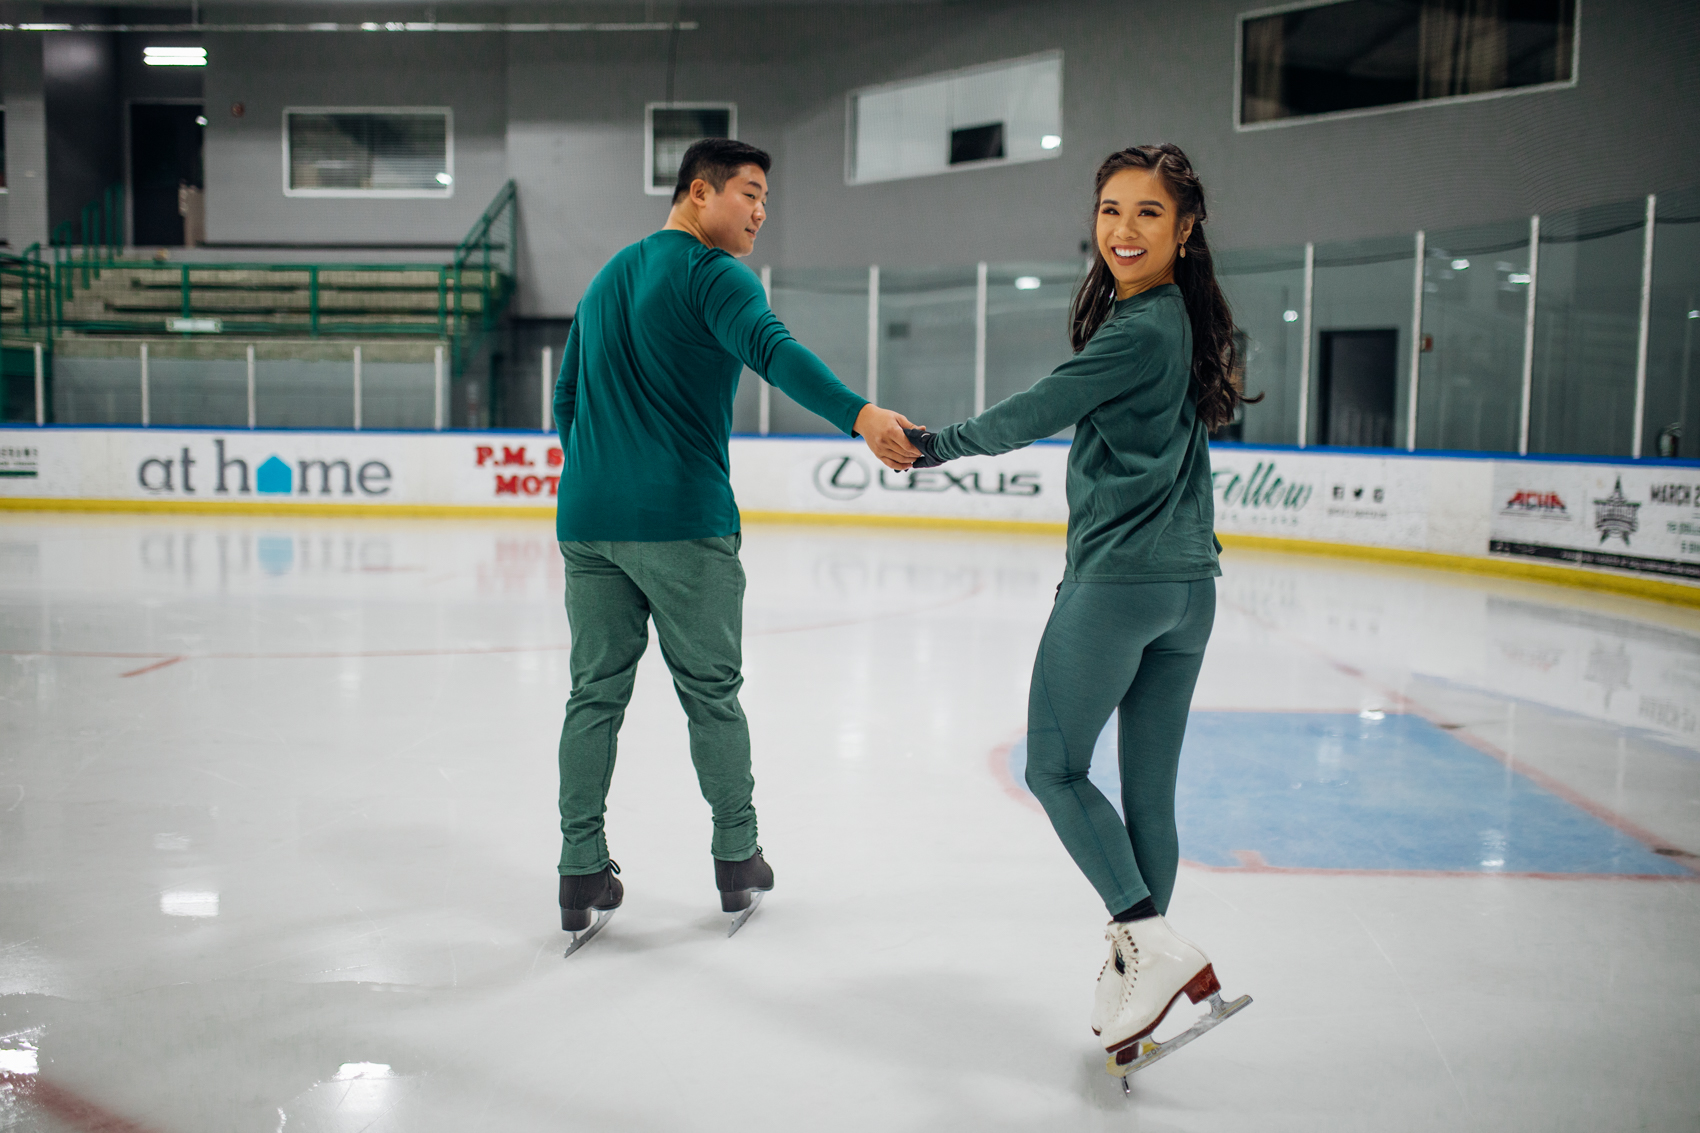 Ice skating outfit by Outdoor Voices